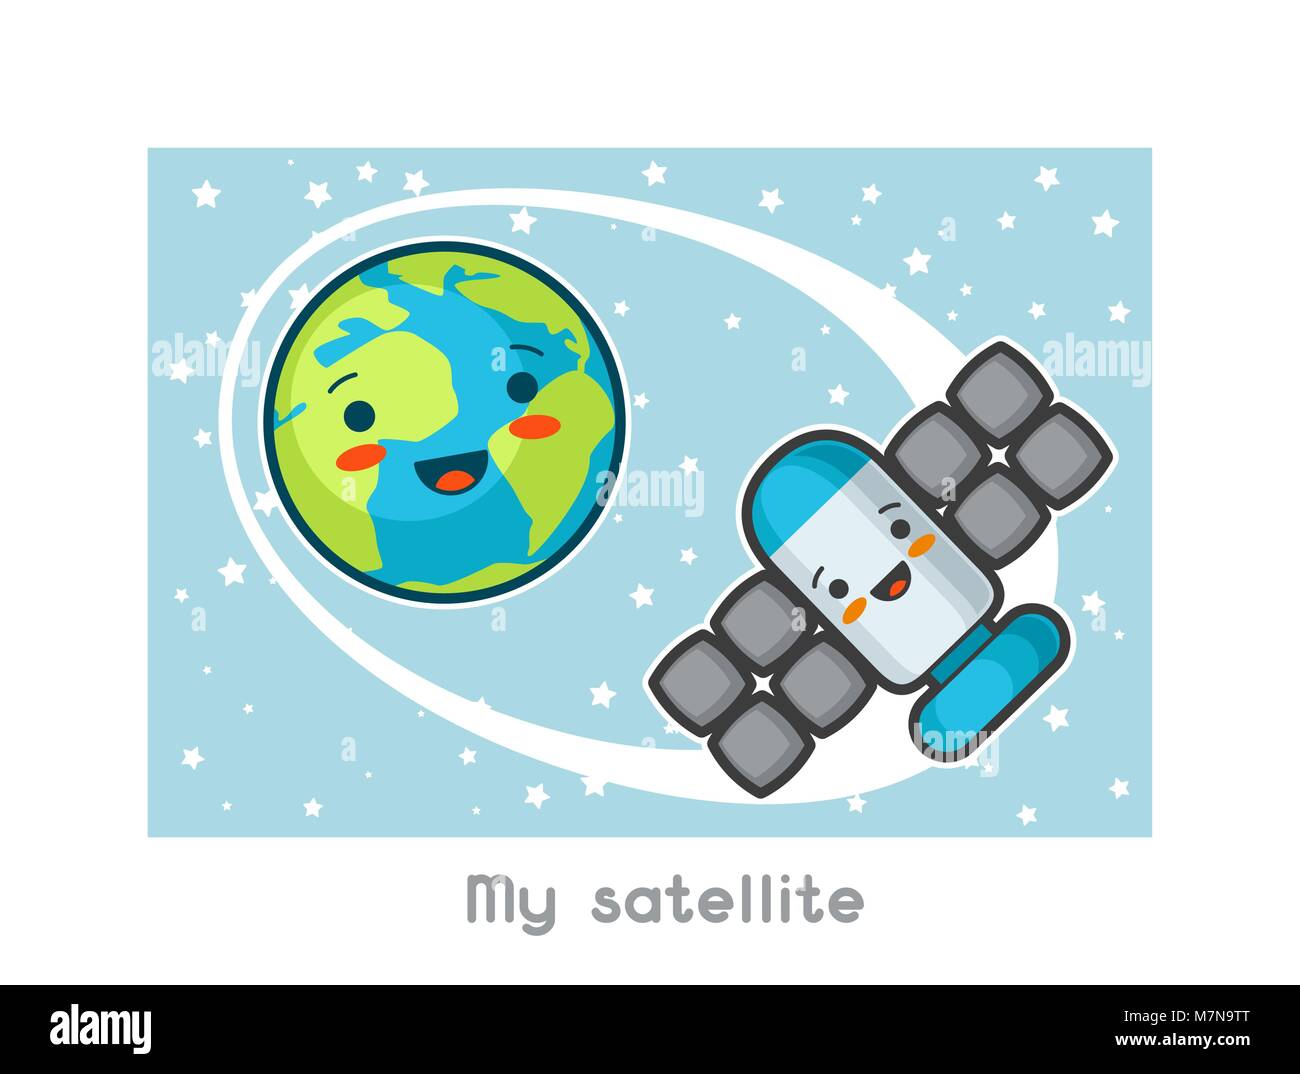 My satellite. Kawaii space funny card. Doodles with pretty facial expression. Illustration of cartoon earth and sputnik Stock Vector